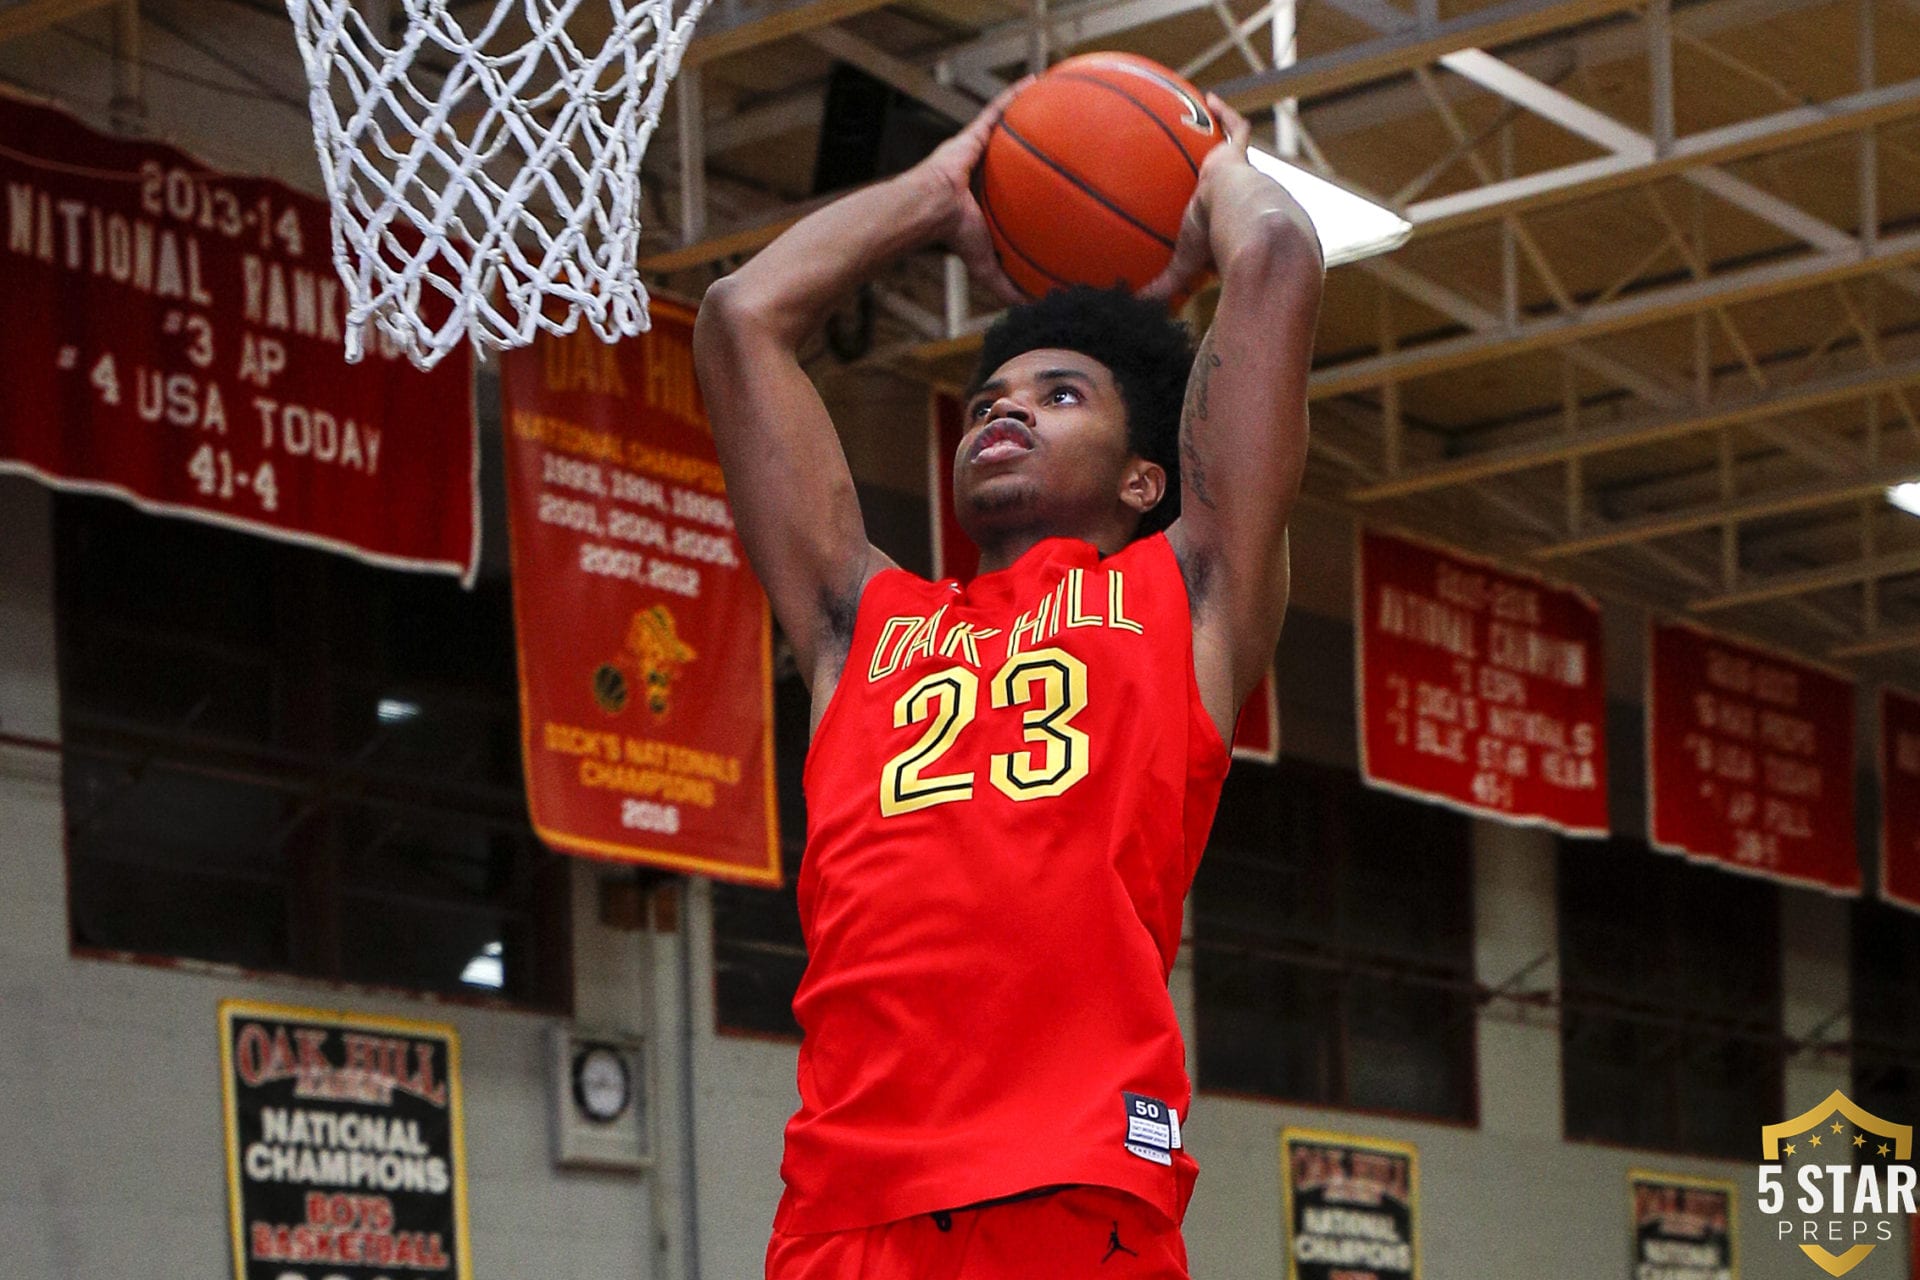 Oak Hill's Darrick Jones Jr. goes in for the dunk on Saturday, Dec. 15, 2018, against visiting Grace Christian Academy. (Photo: Danny Parker)